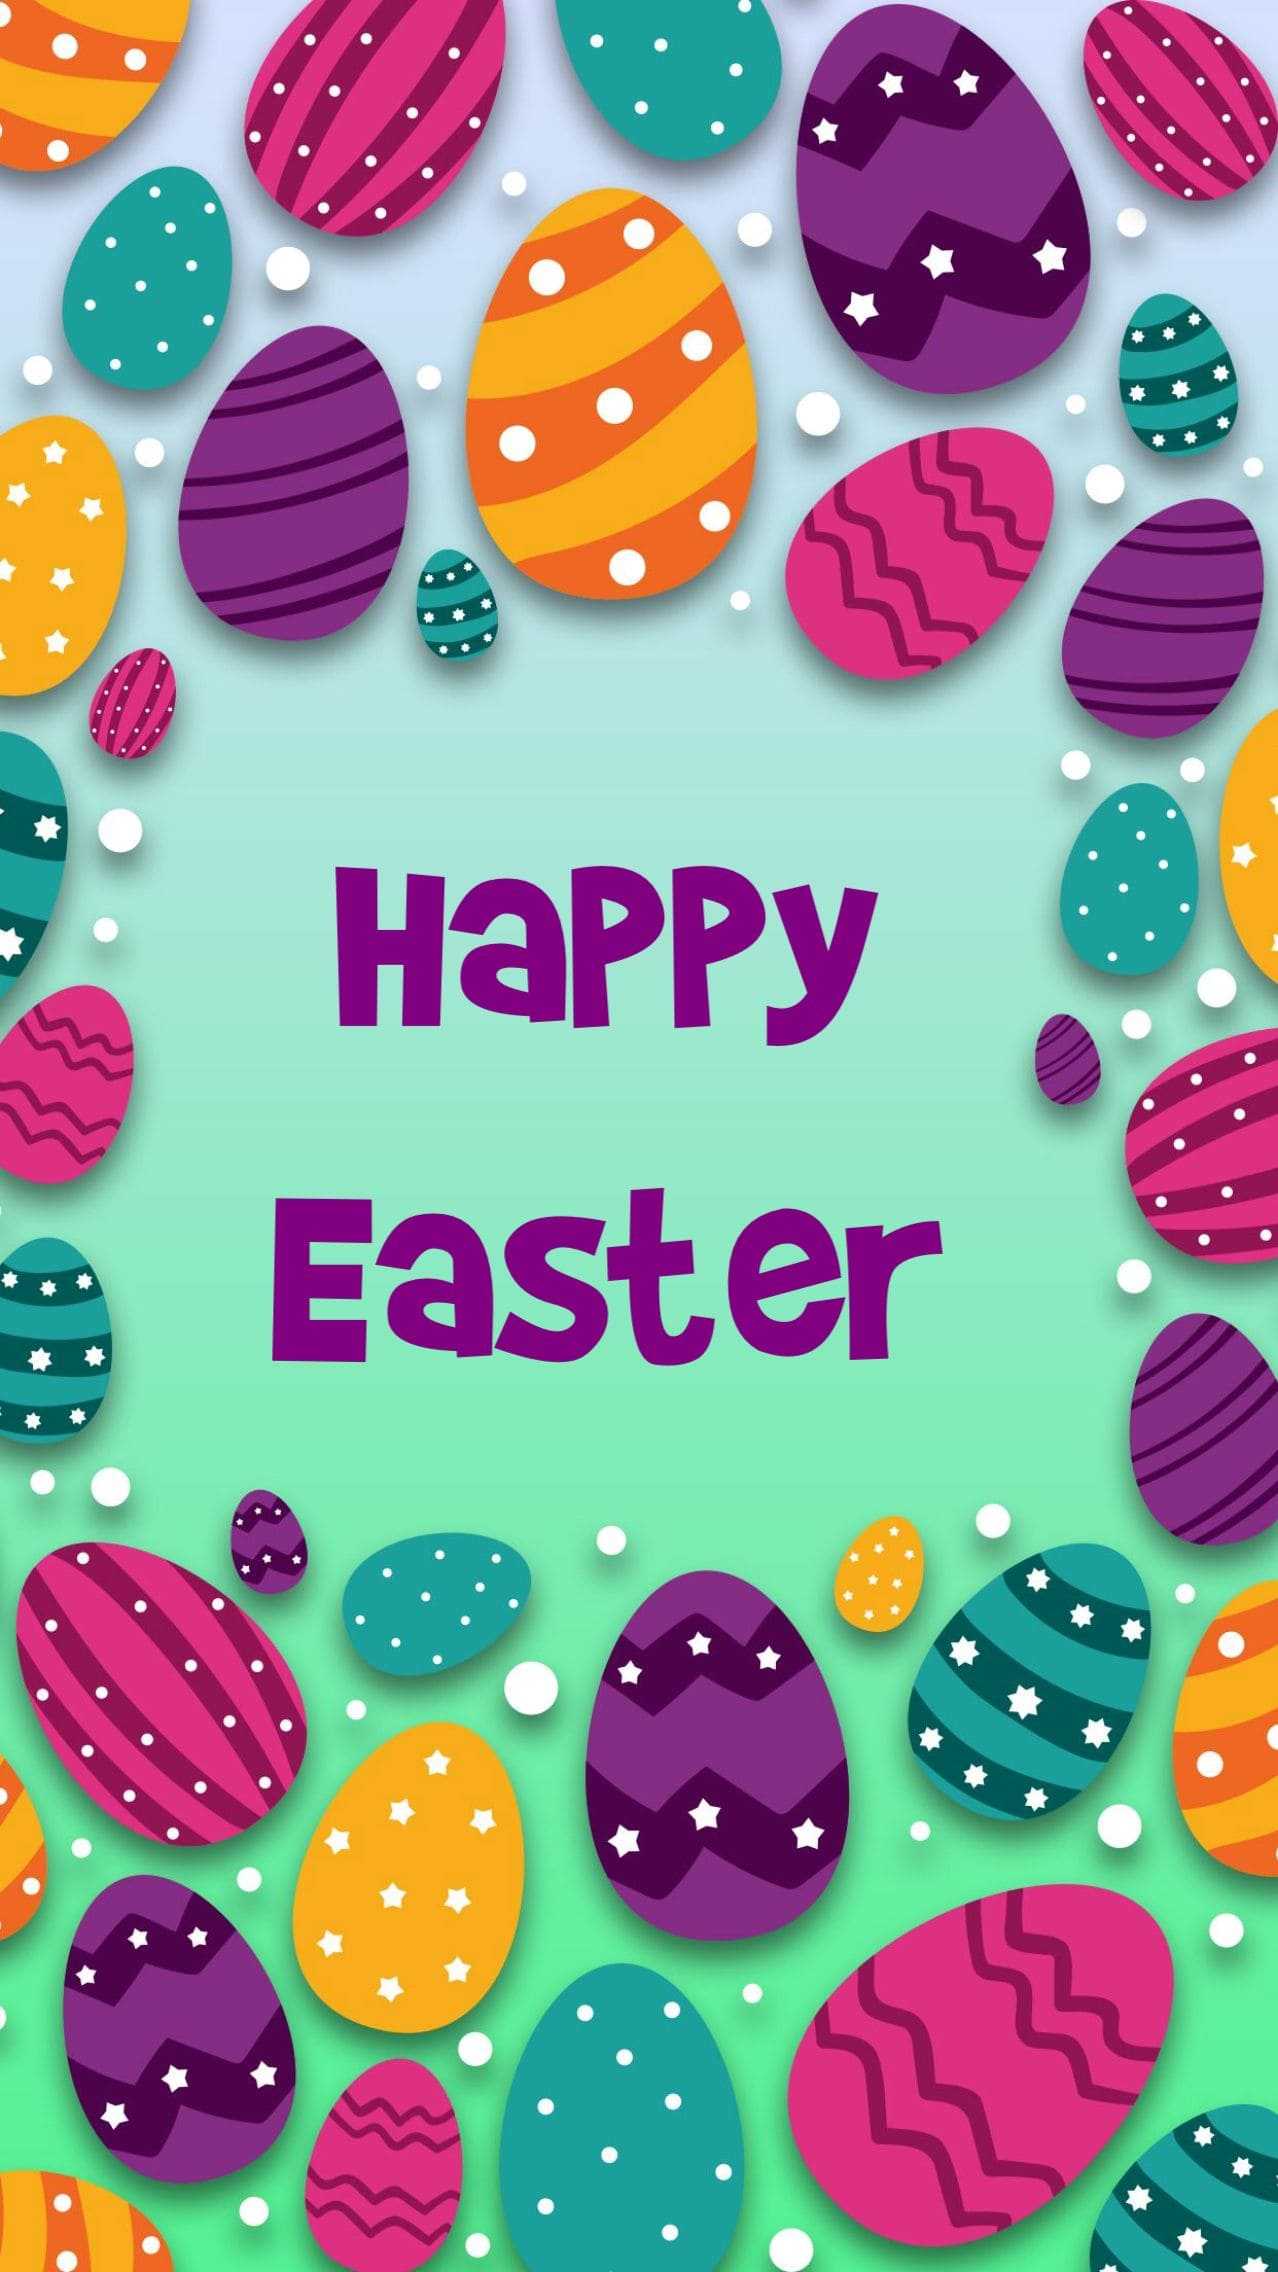 Free Easter Wallpaper - NawPic